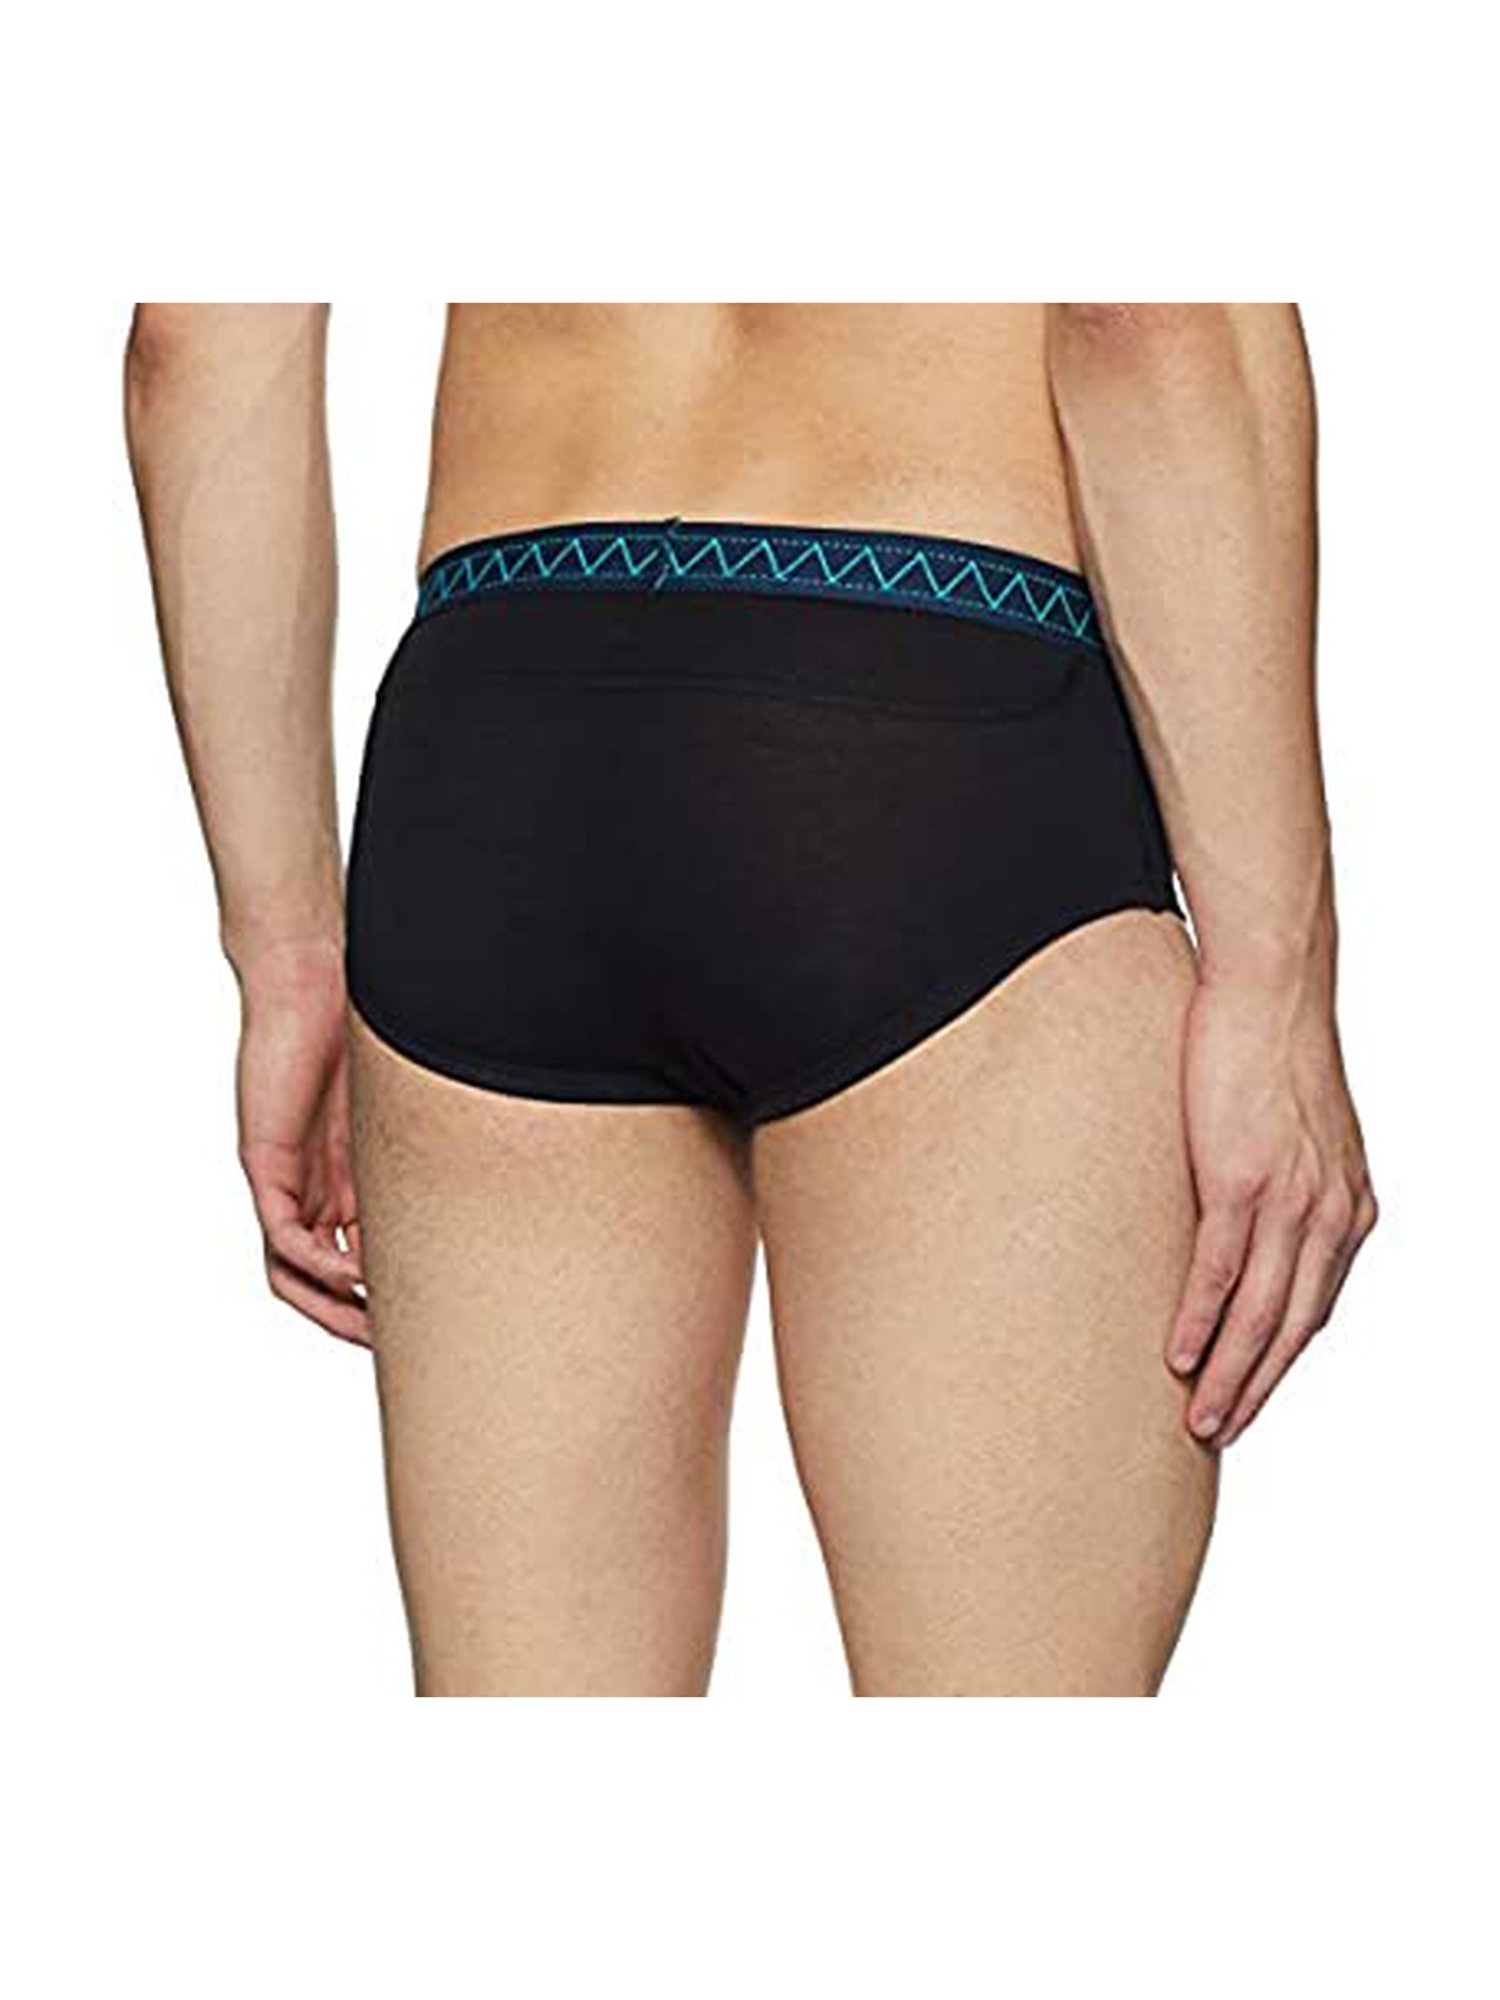 Buy Fruit of the Loom Black Cotton Briefs for Mens Online @ Tata CLiQ